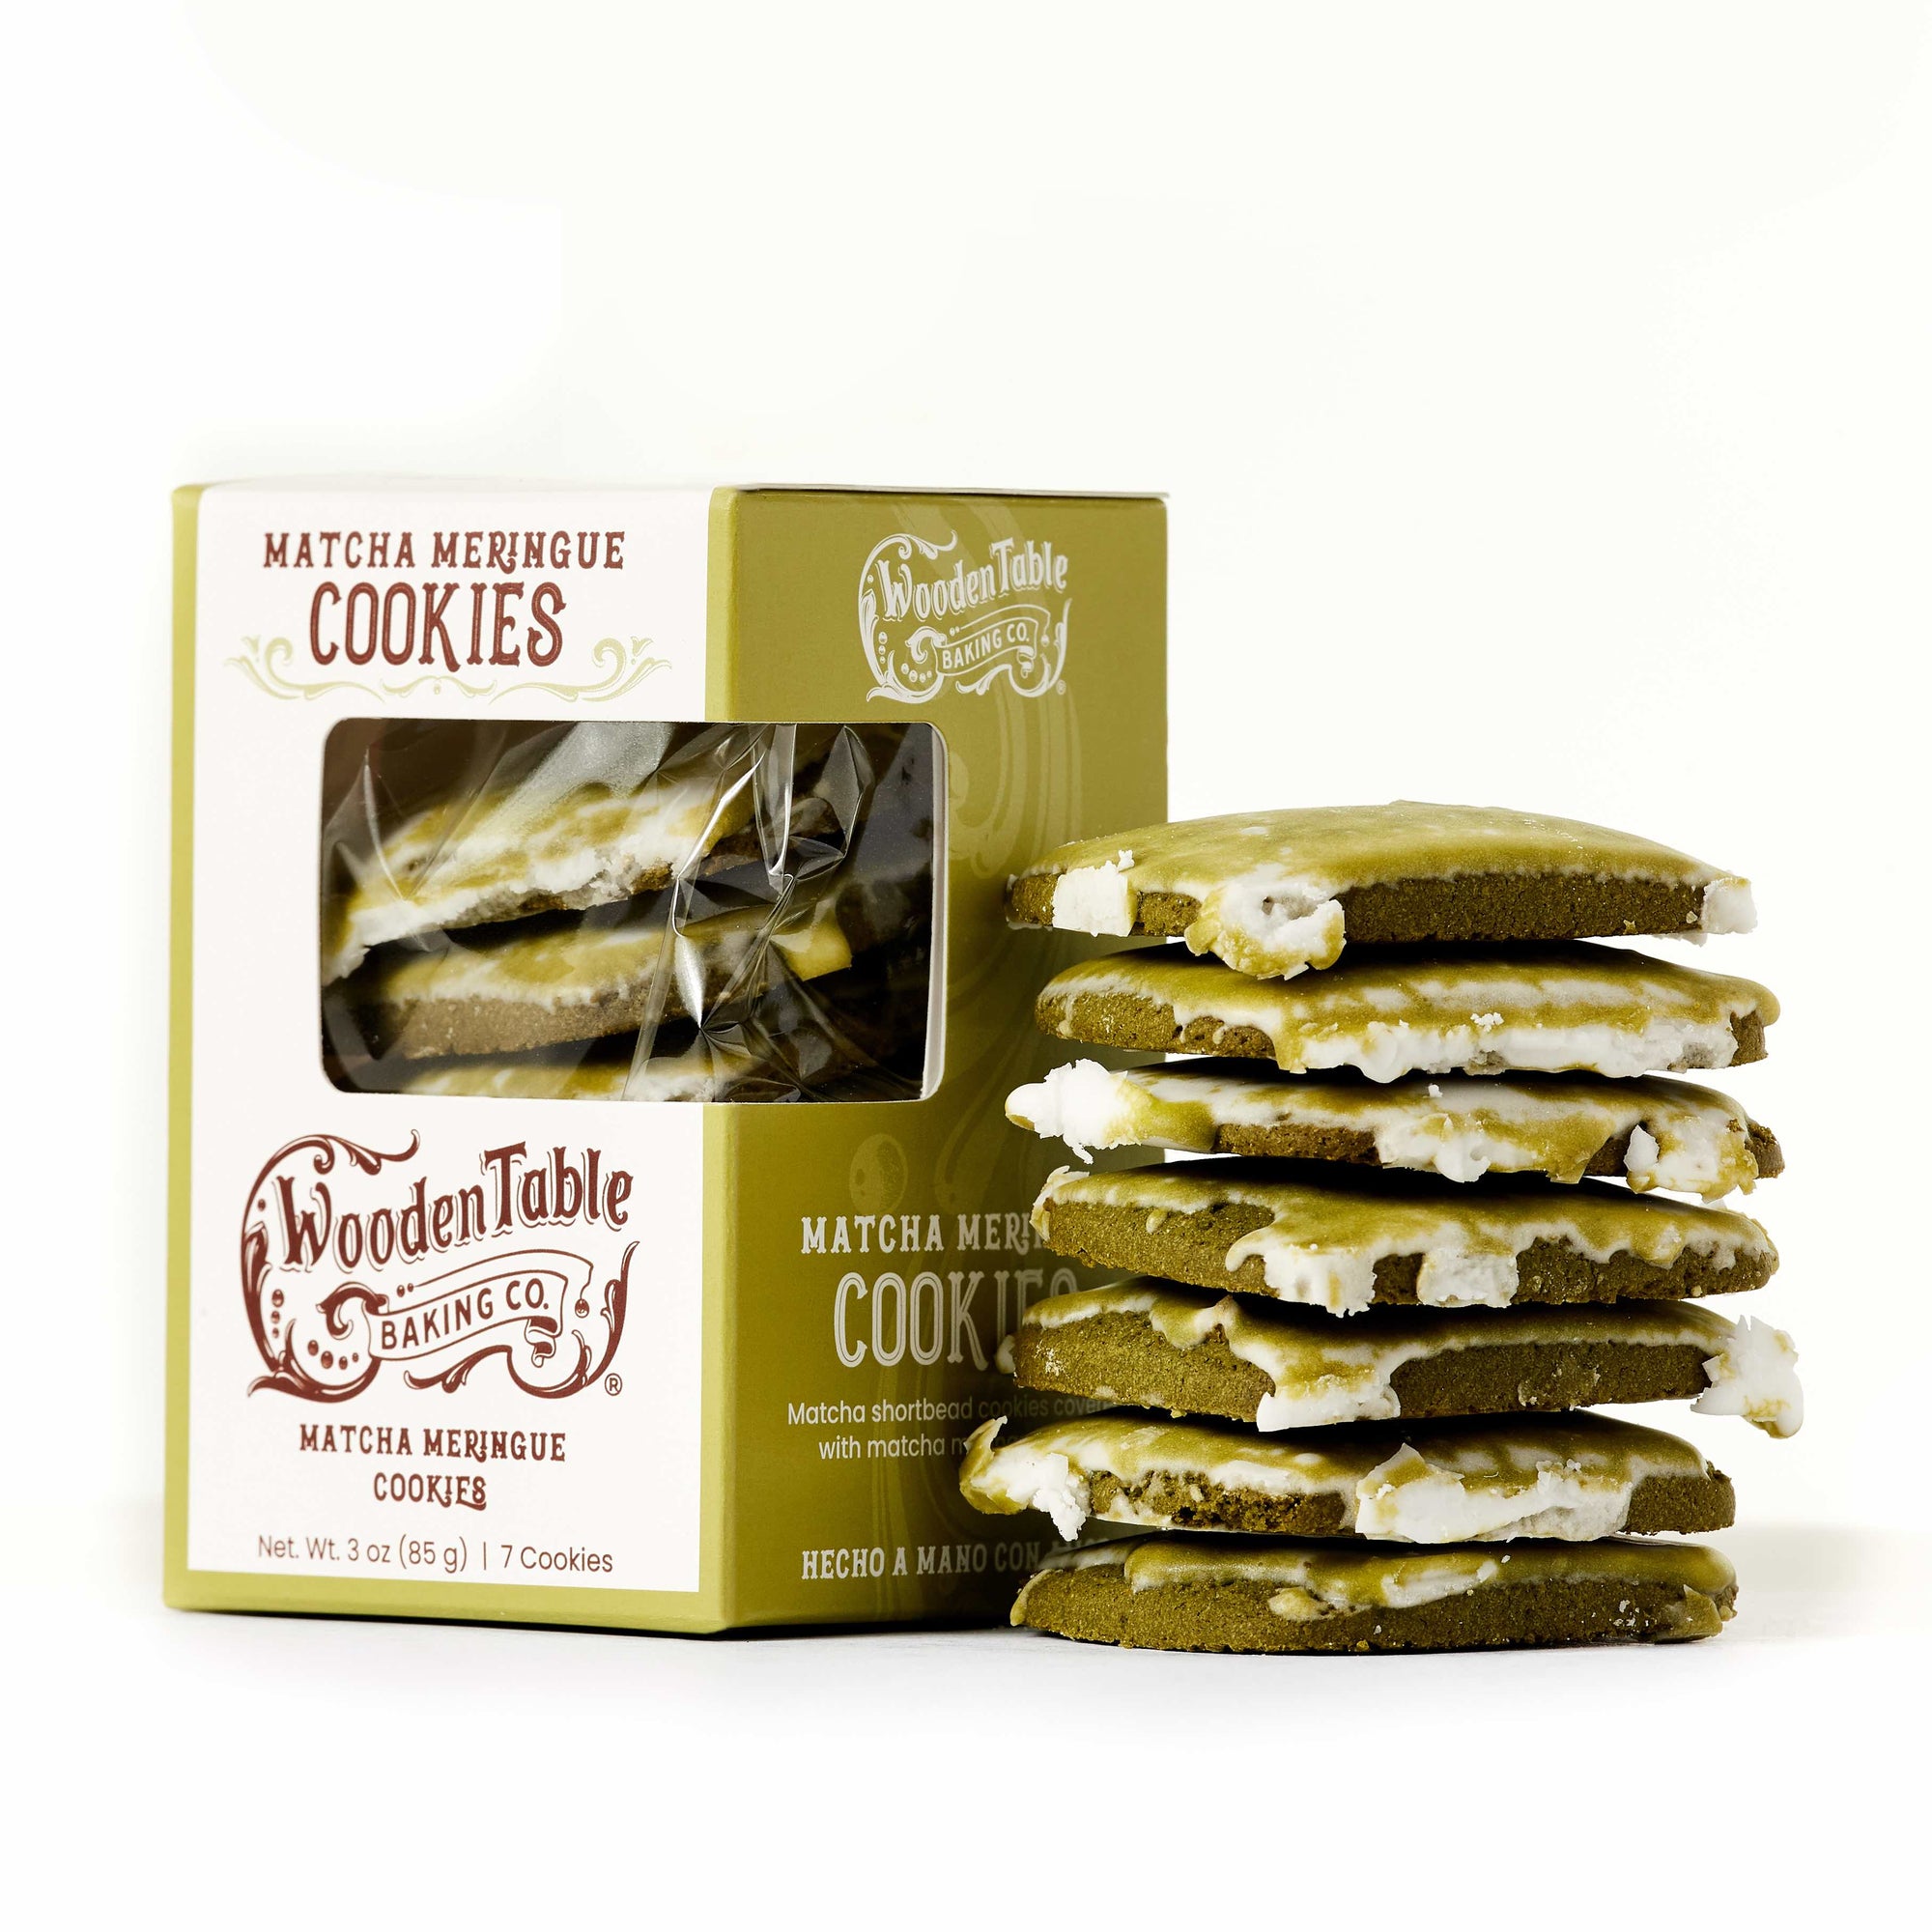 7 Gluten Free Matcha Meringue Tea Cookies in Packaging from Wooden Table Baking Company